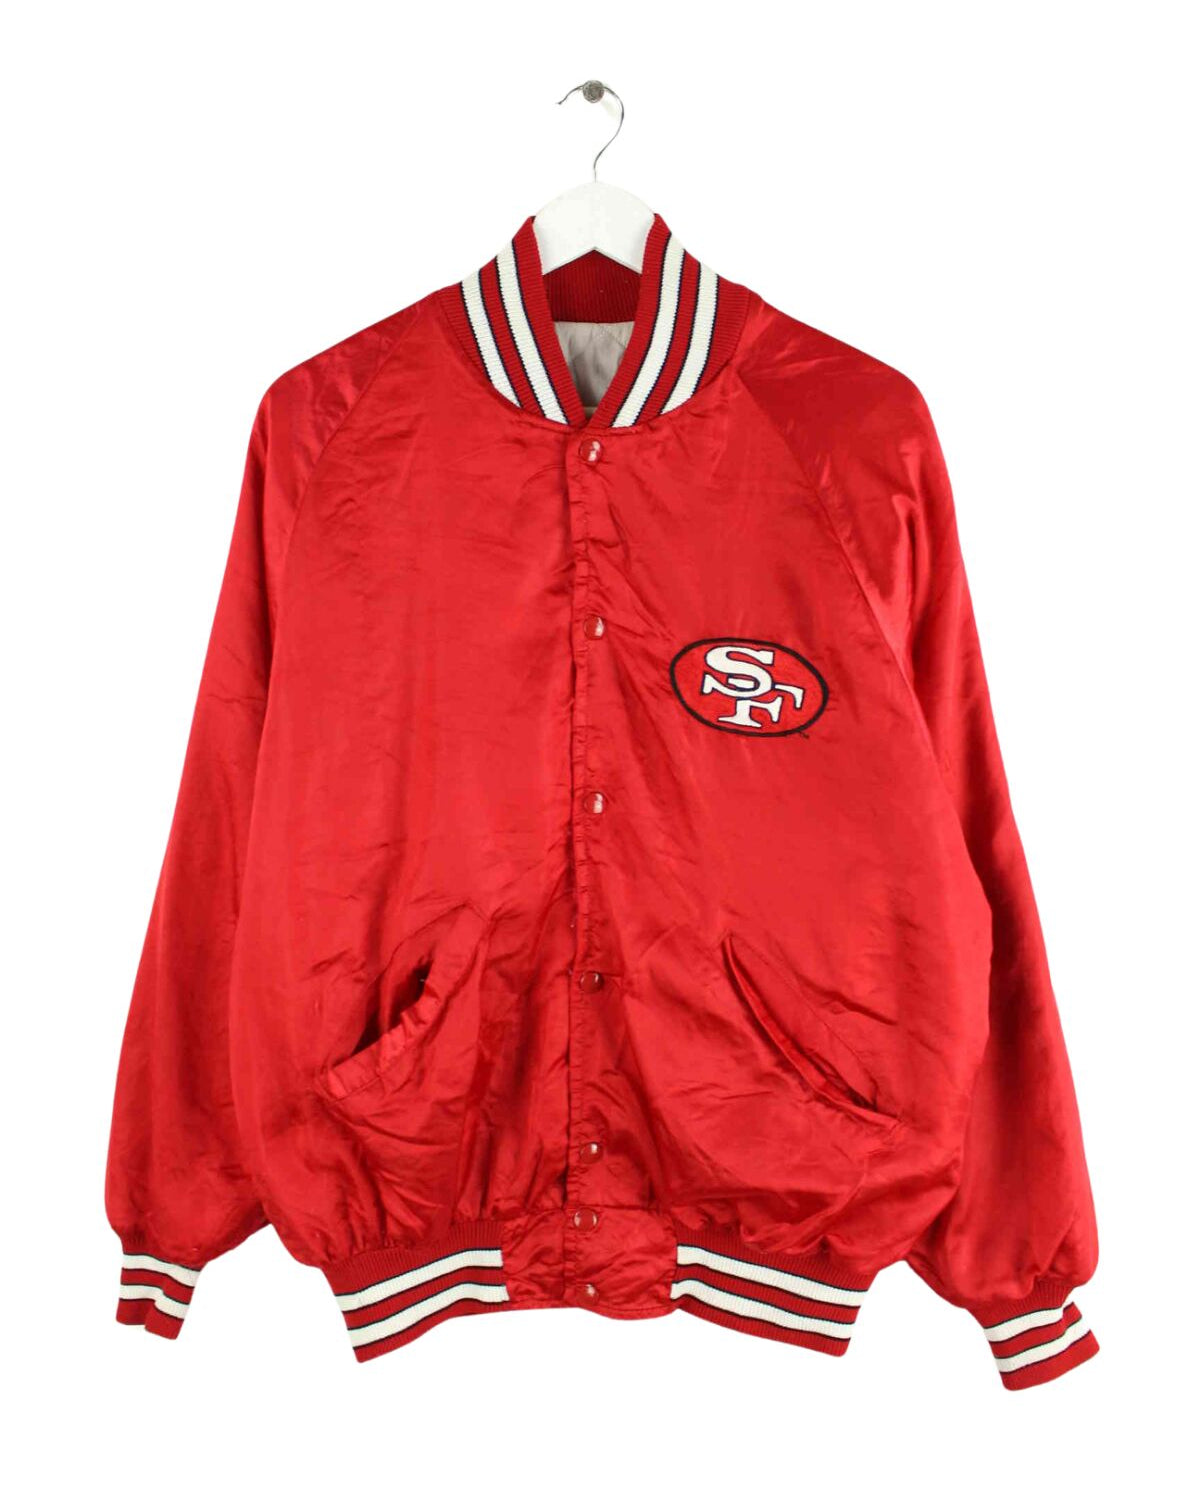 Vintage 80s San Francisco 49ers Embroidered Jacke Rot M (front image)